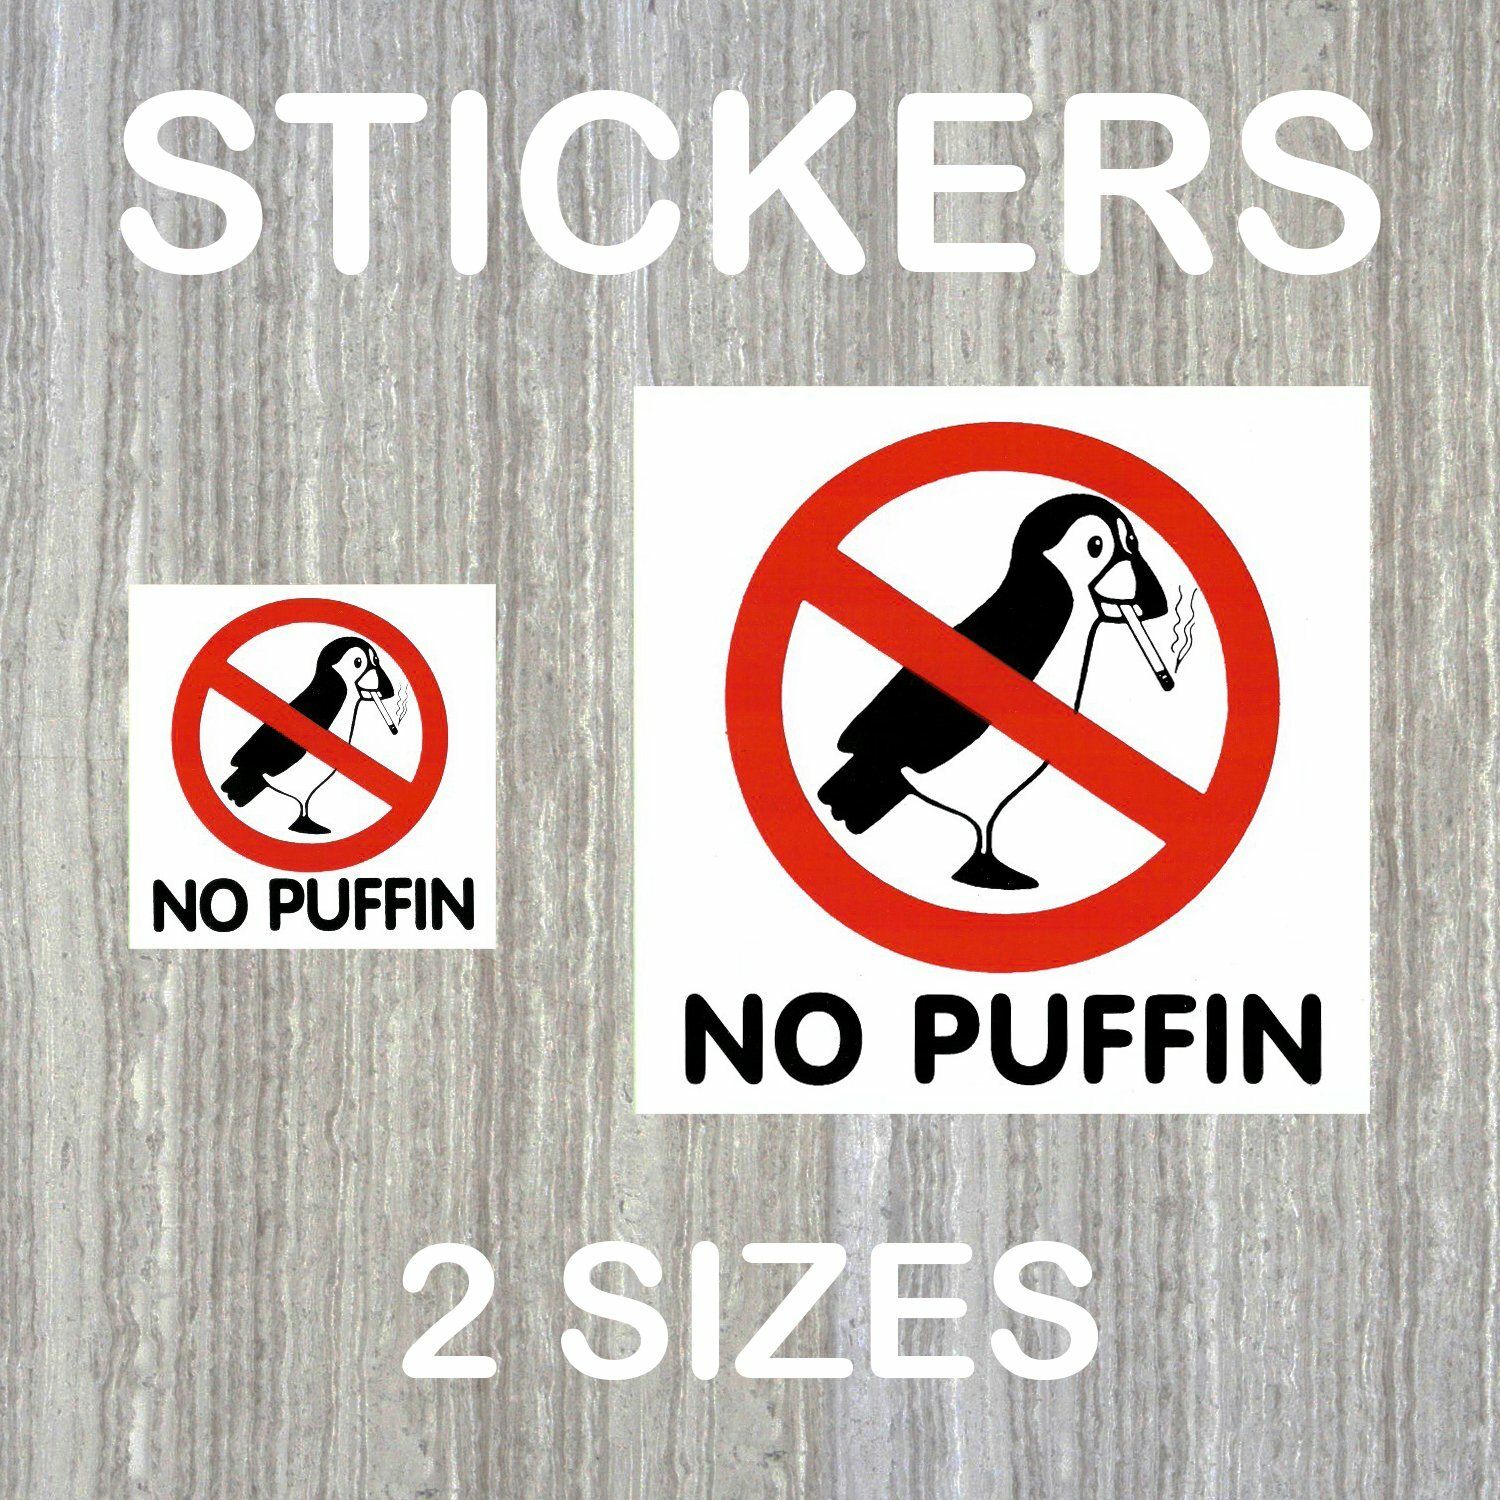 No smoking stickers "NO PUFFIN", different sizes